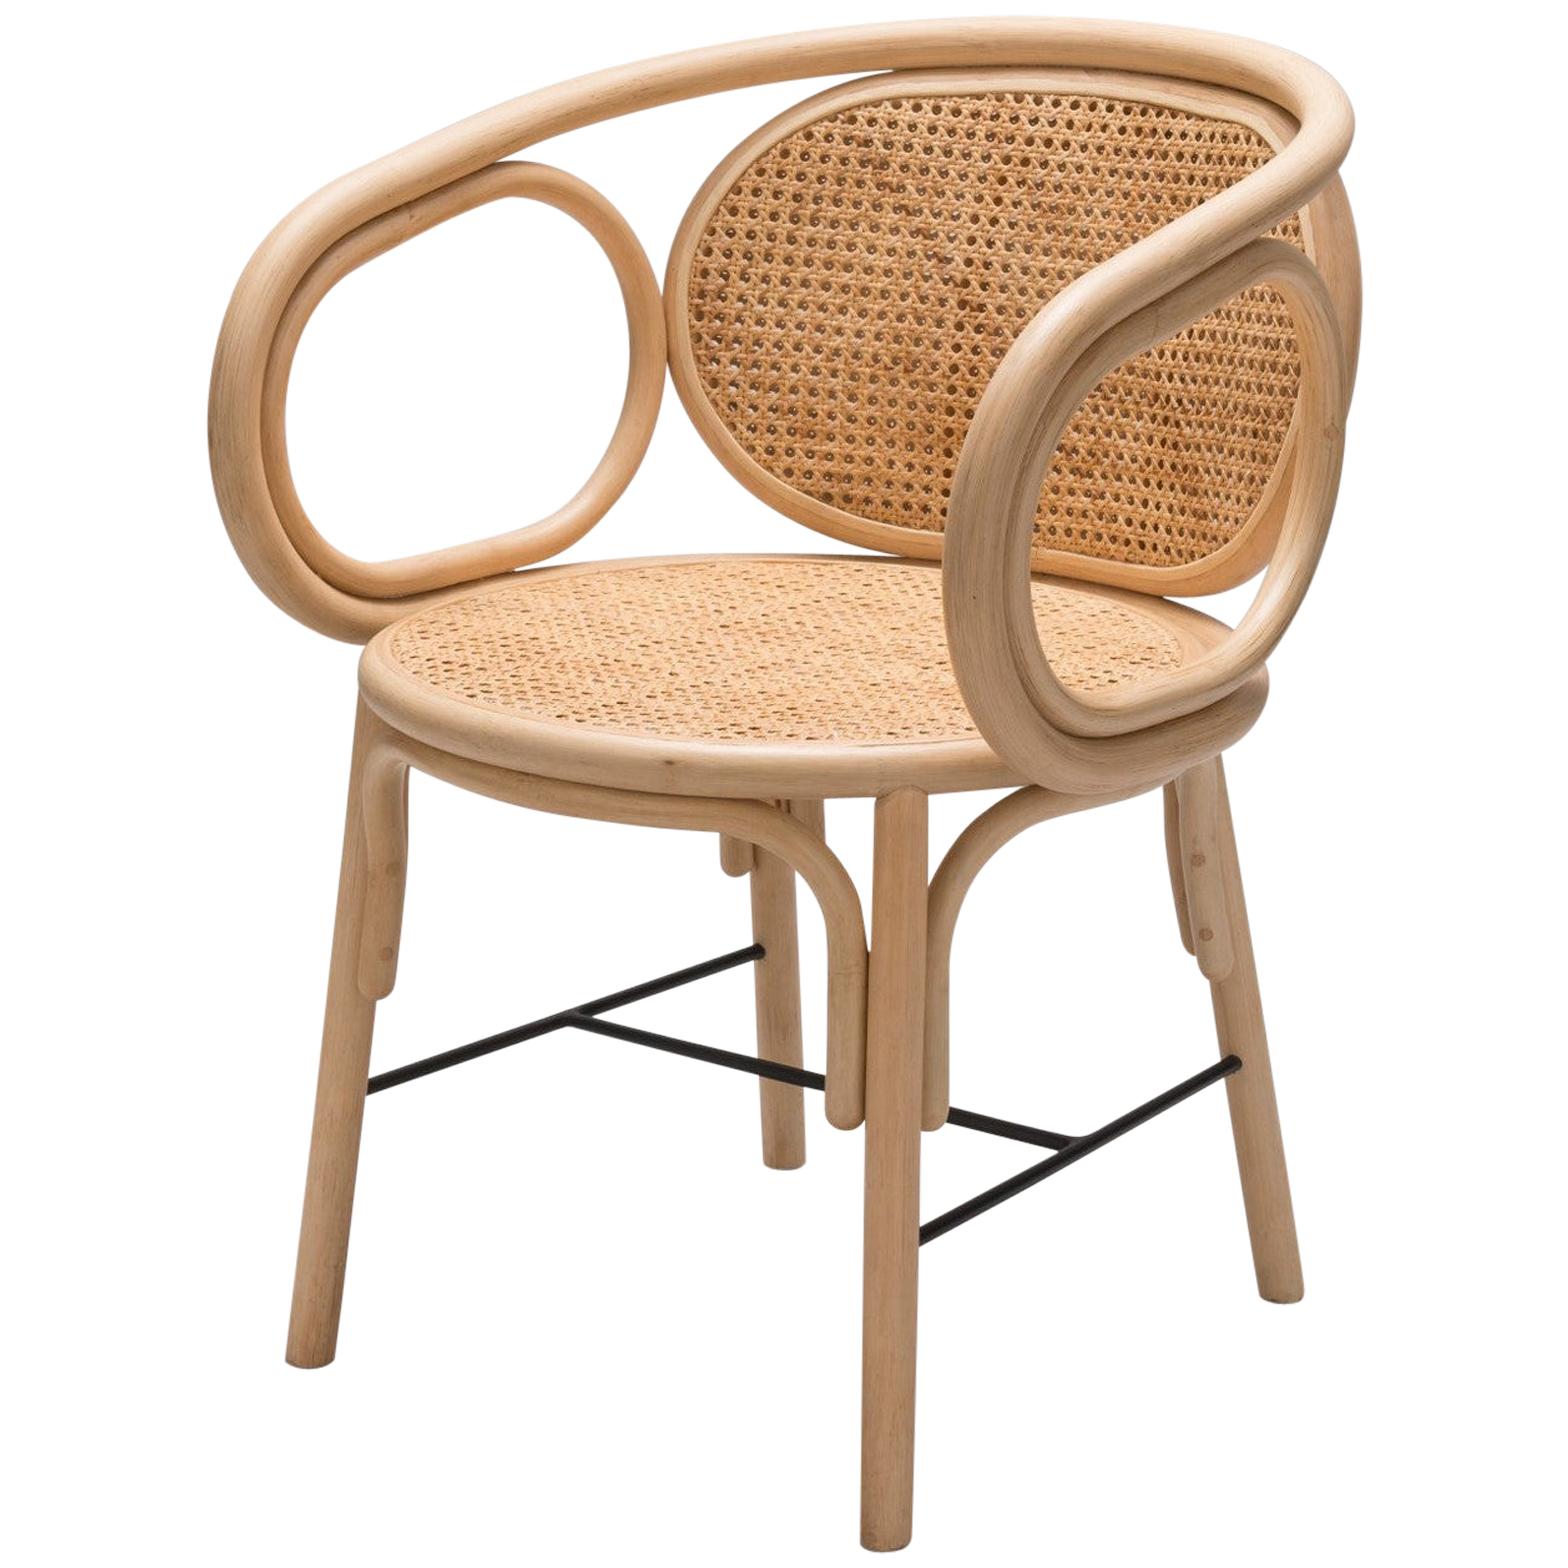 French Modern Design Rattan and Handcrafted Wicker Cane Armchair